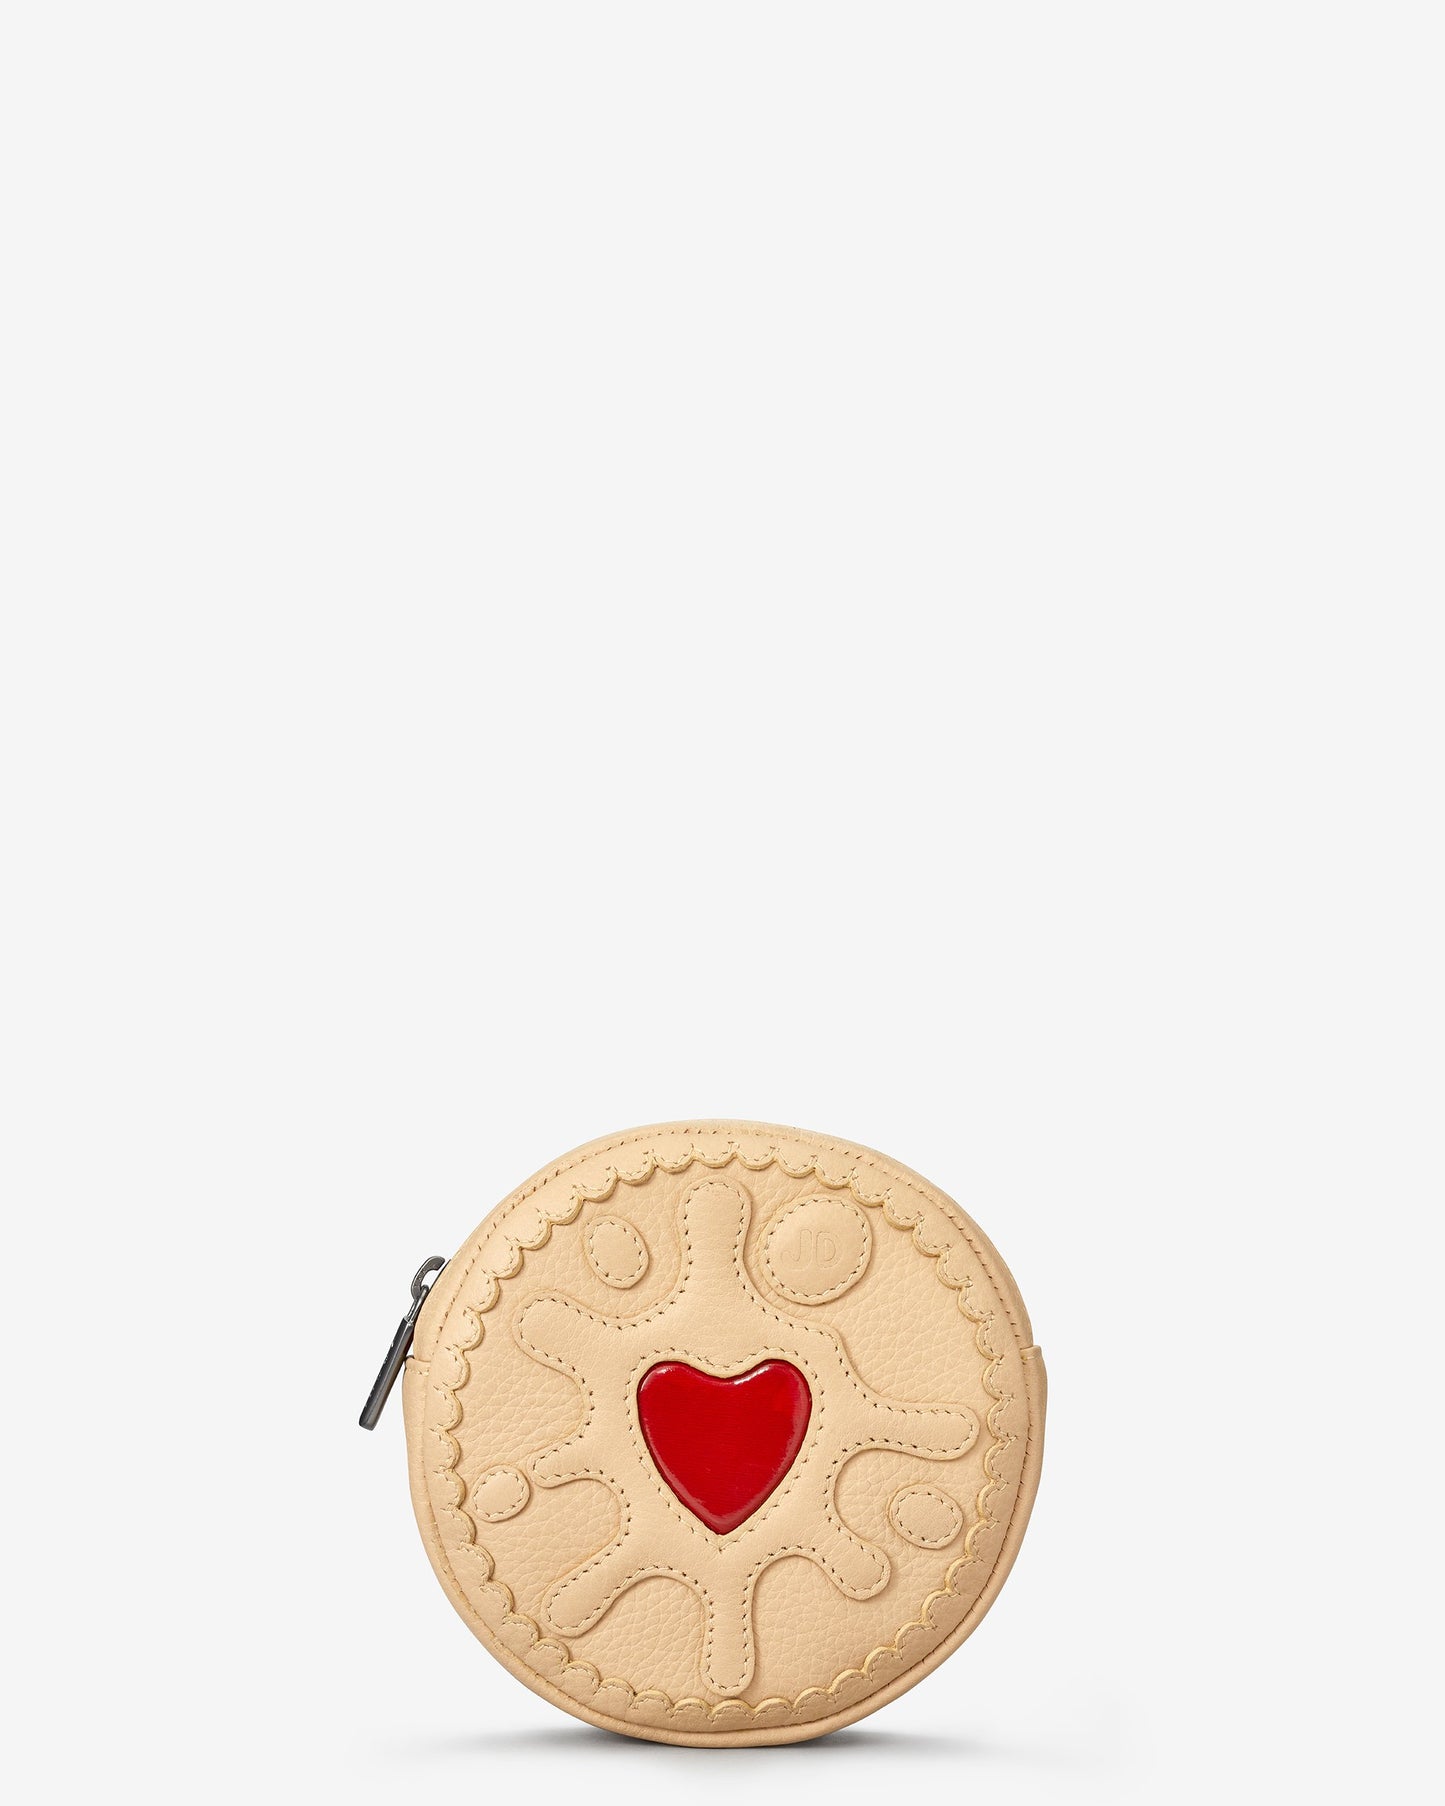 Yoshi Leather Jammy Dodger Biscuit Coin Purse